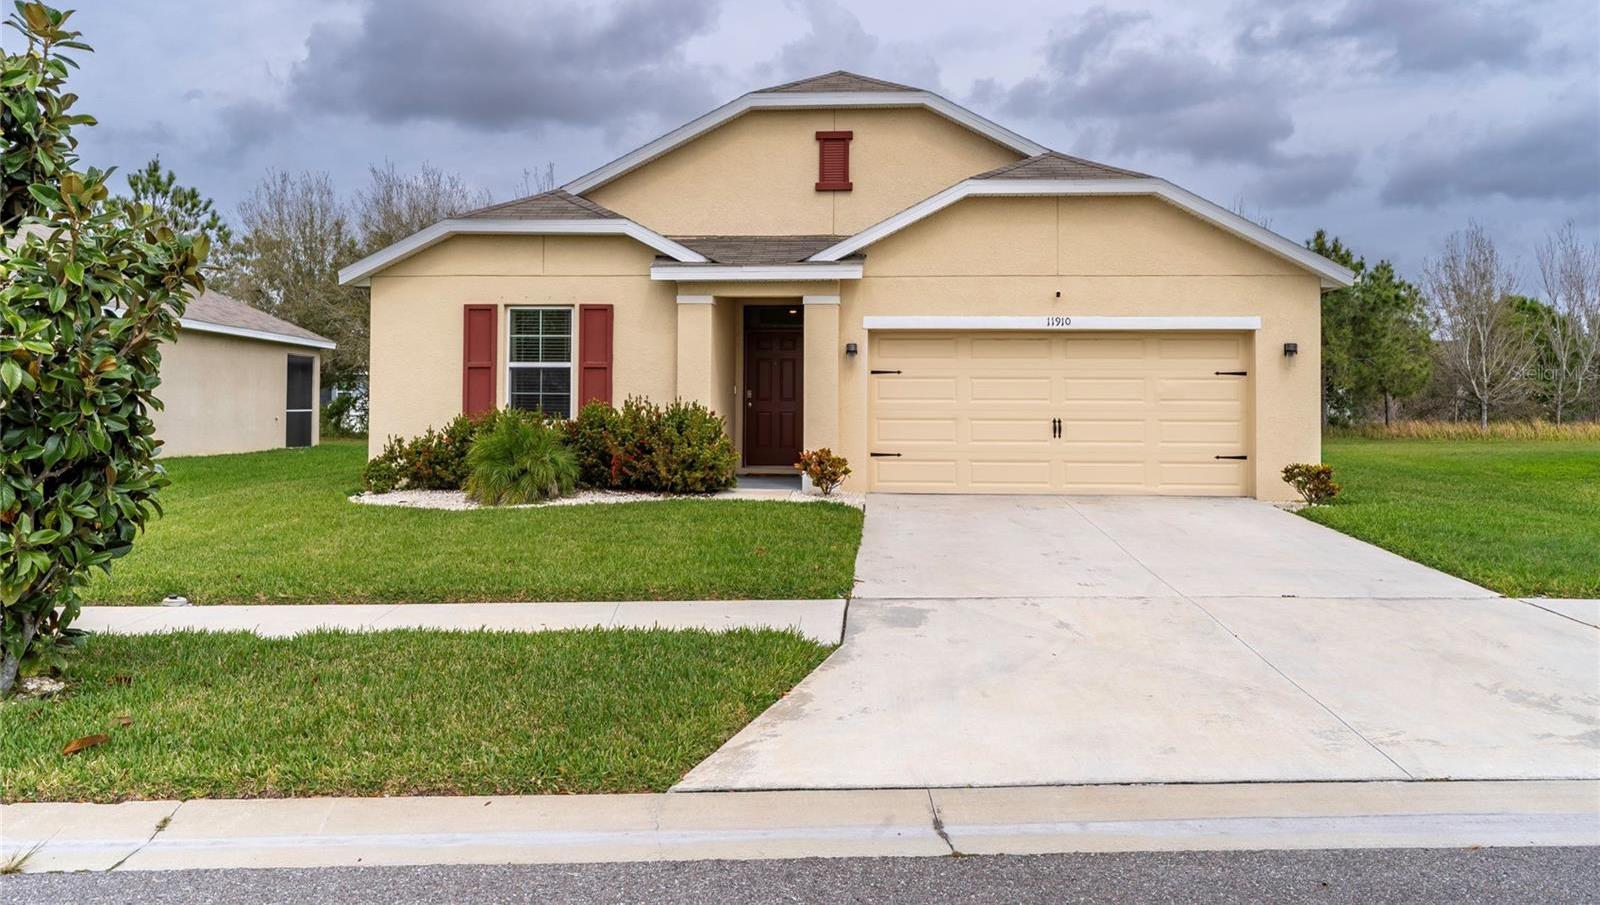 Photo one of 11910 Little Violet Cir Riverview FL 33578 | MLS O6187639